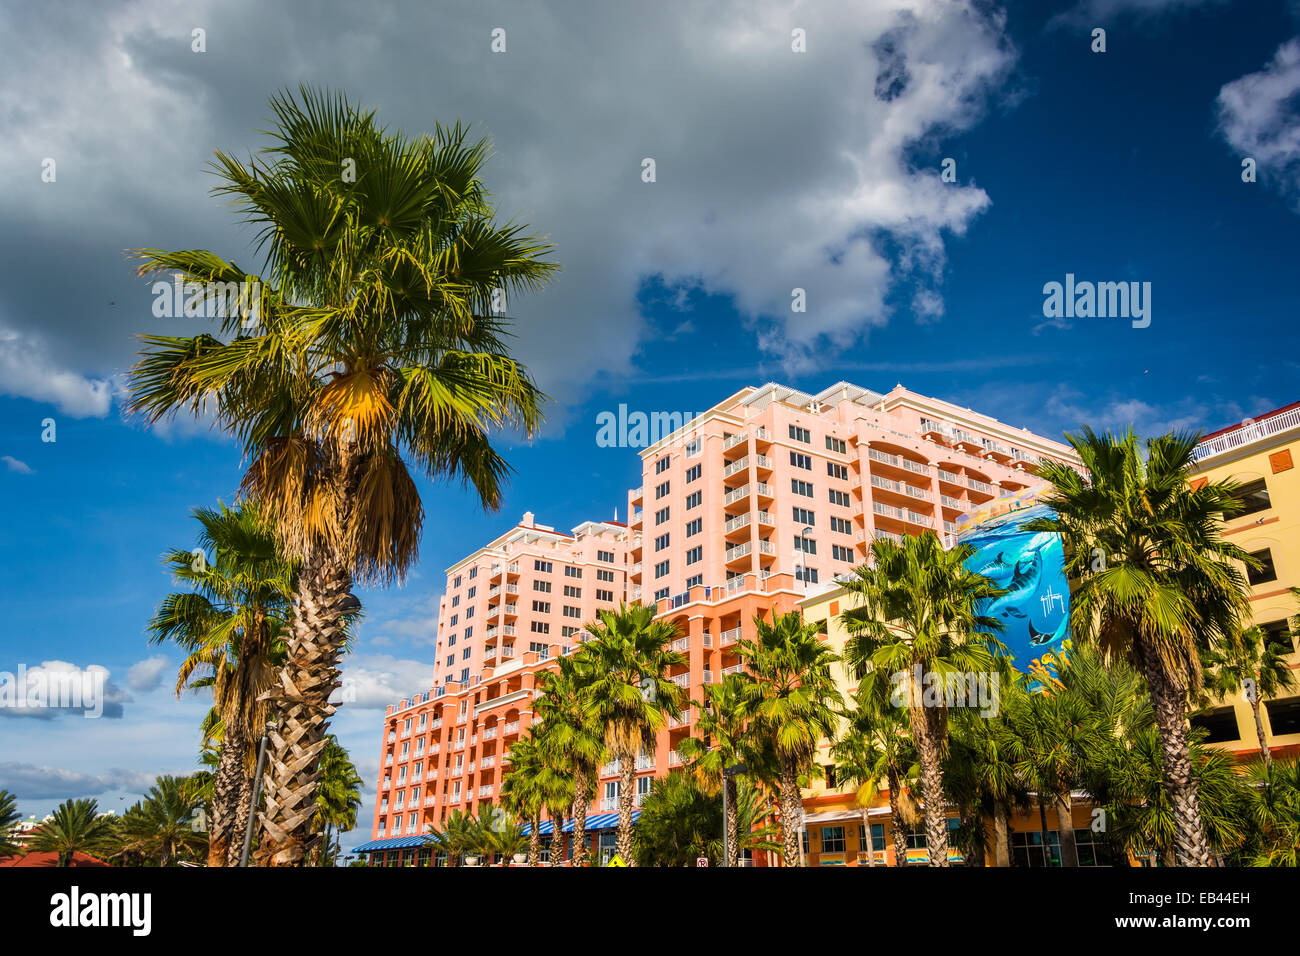 Palm trees and large hotel in Clearwater Beach, Florida. Stock Photo